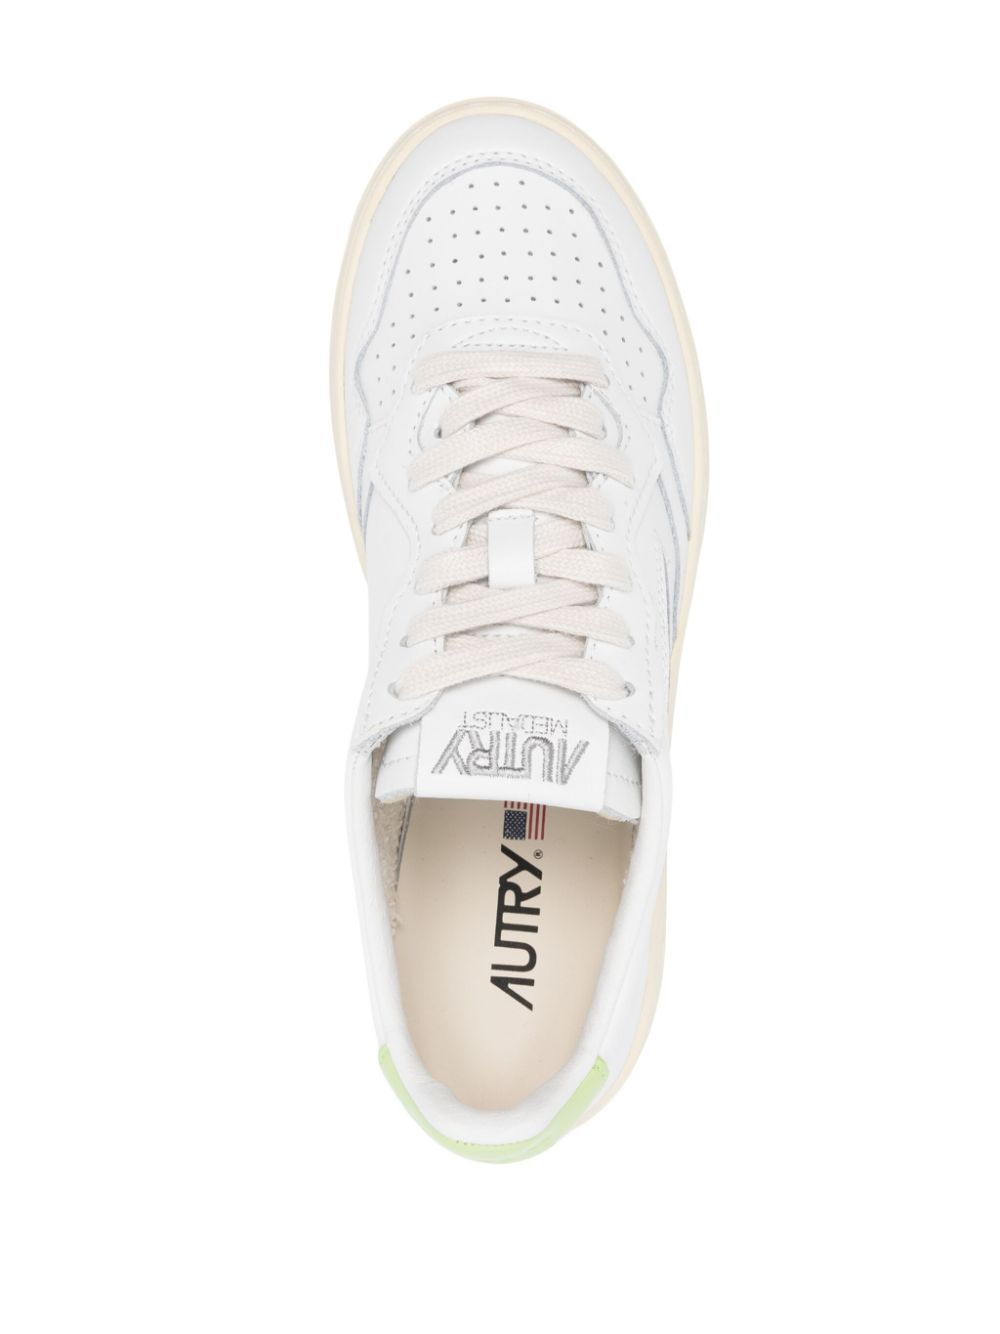 Medalist leather sneakers<BR/><BR/><BR/>